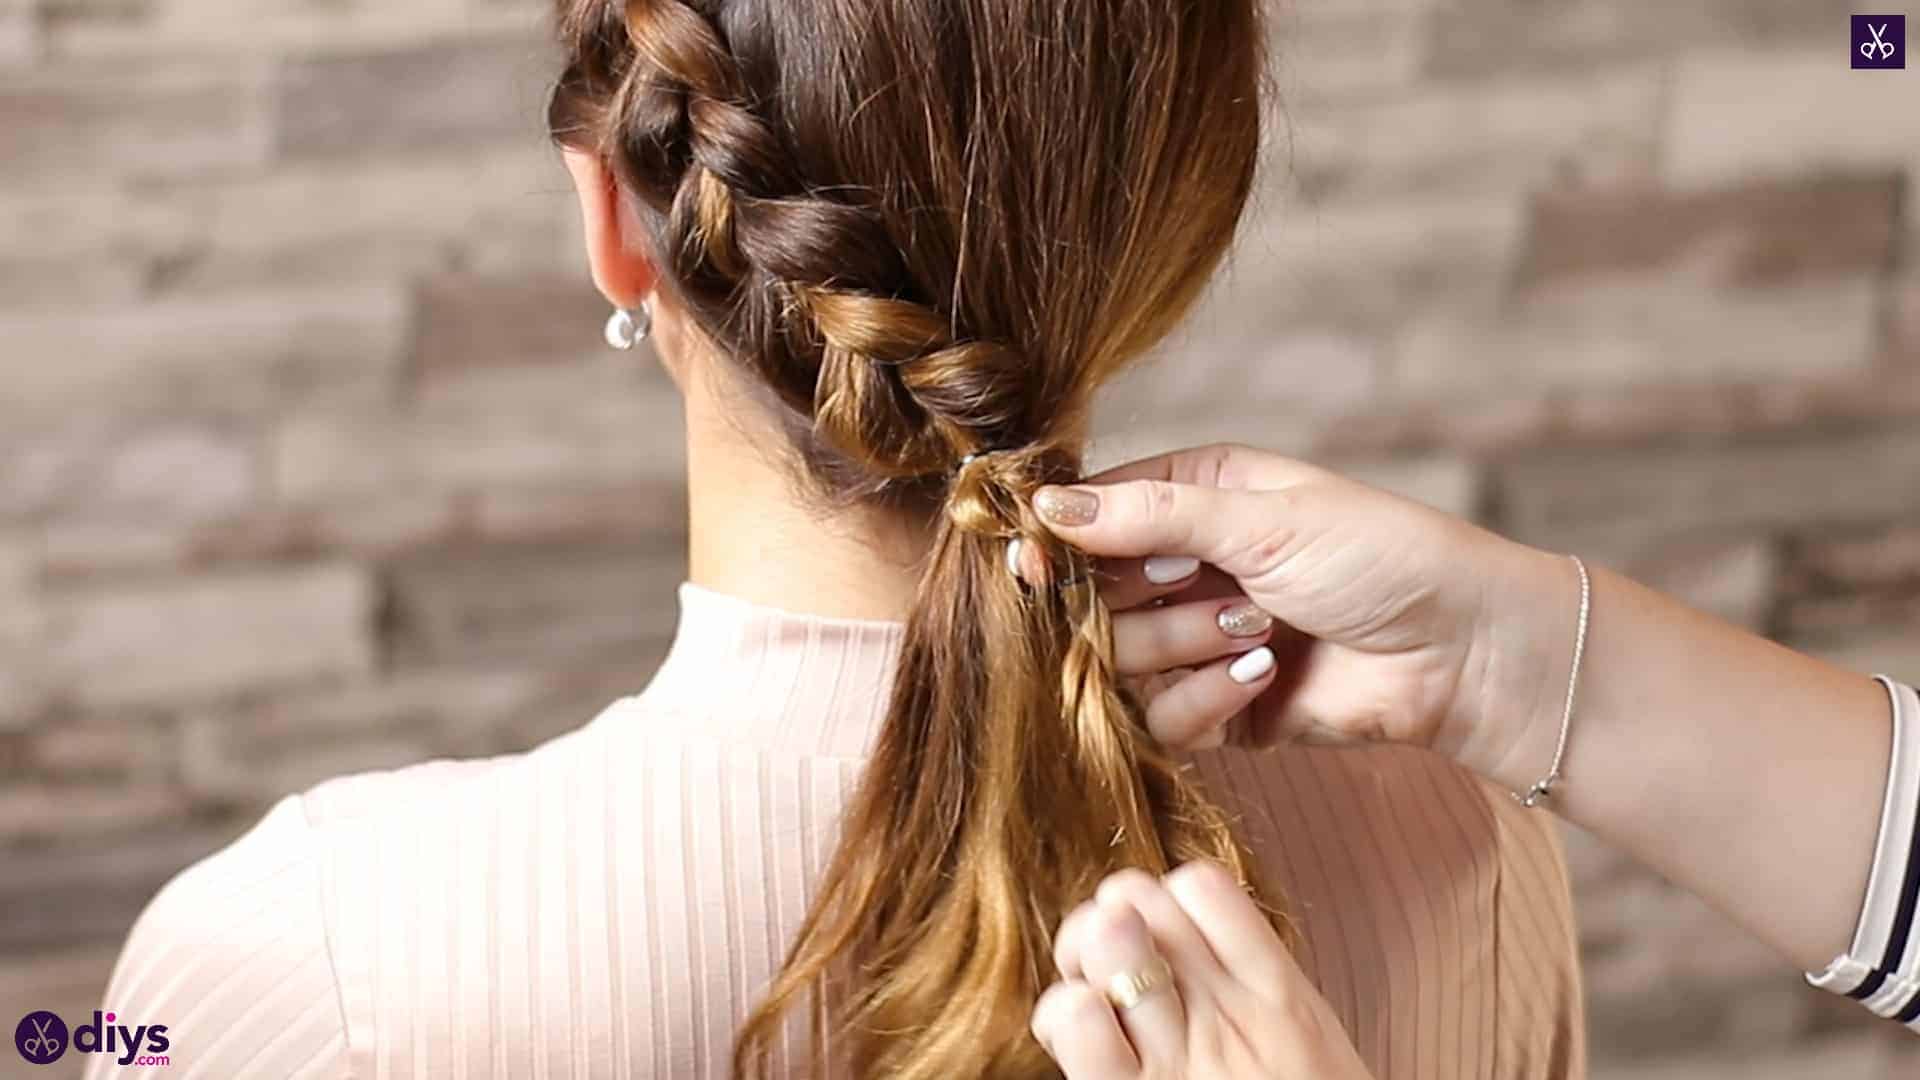 Step Ladder Braid Hairstyle | Hairstyles For Girls - Princess Hairstyles